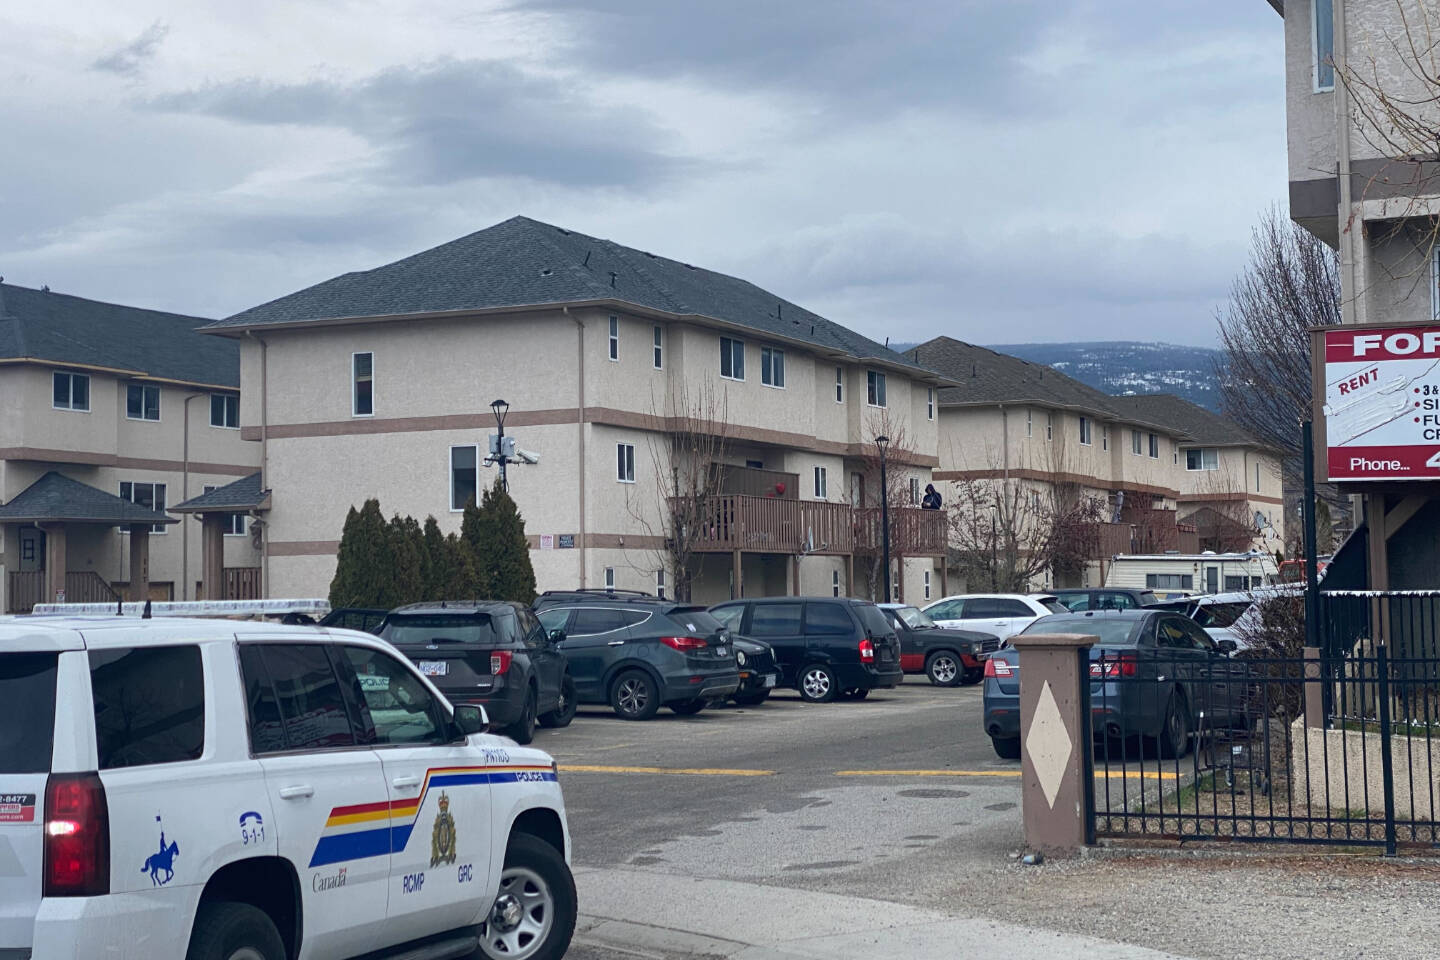 RCMP in front of the Maples where a shooting allegedly took place on the morning of April 18. (Logan Lockhart - Western News)